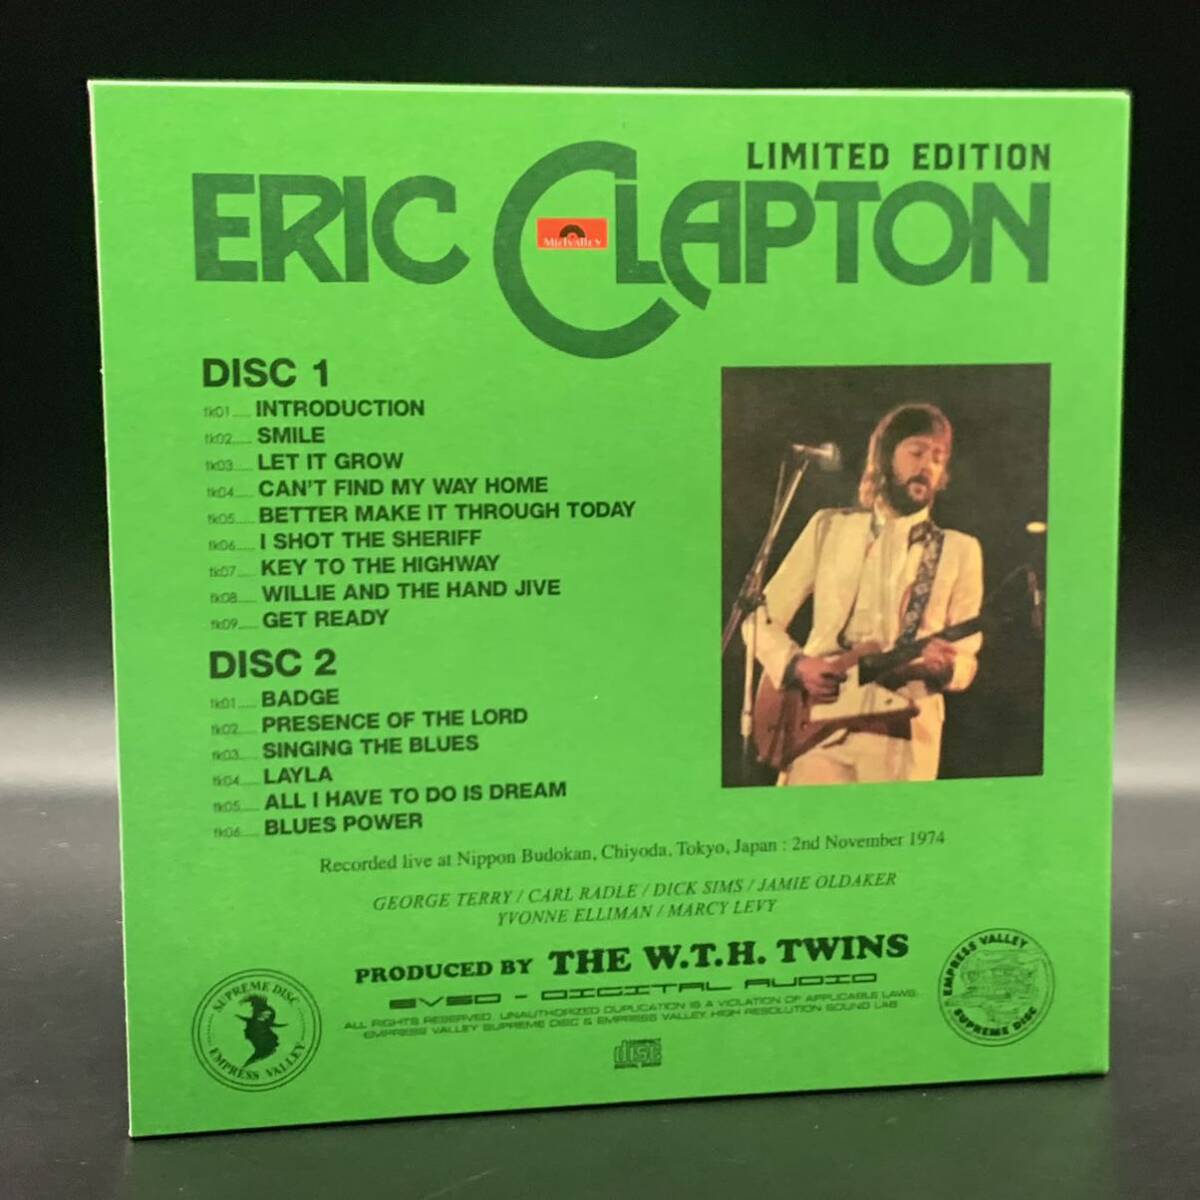 ERIC CLAPTON / TROPICAL SOUND SHOWER「亜熱帯武道館」(6CD BOX with Booklet) 初来日武道館3公演を全て初登場音源で収録！完売品！の画像8